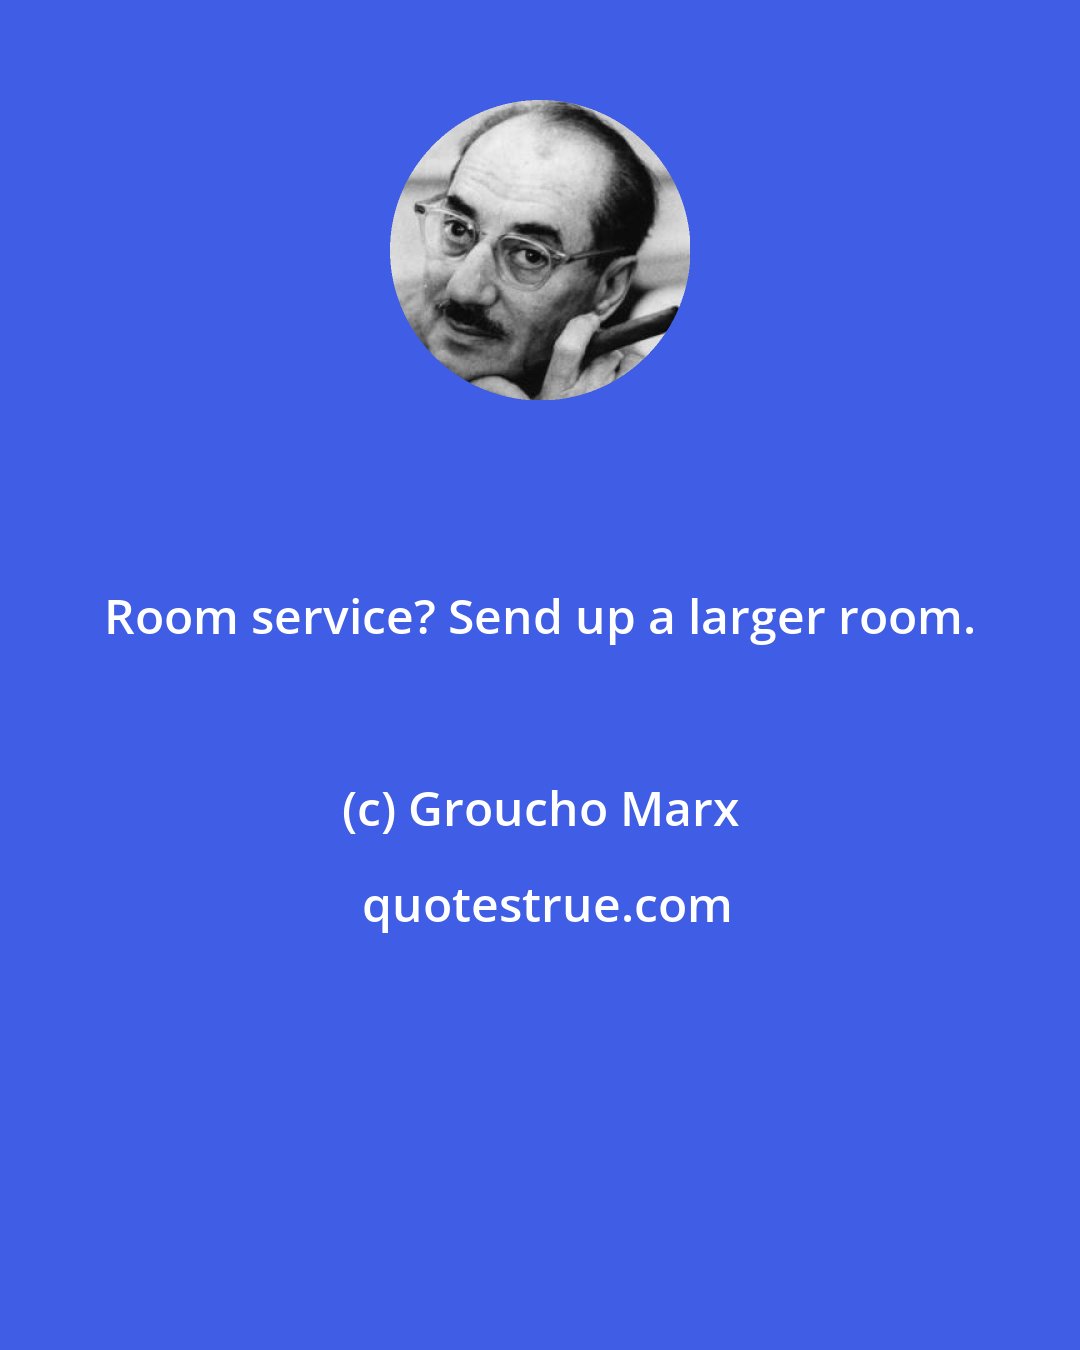 Groucho Marx: Room service? Send up a larger room.